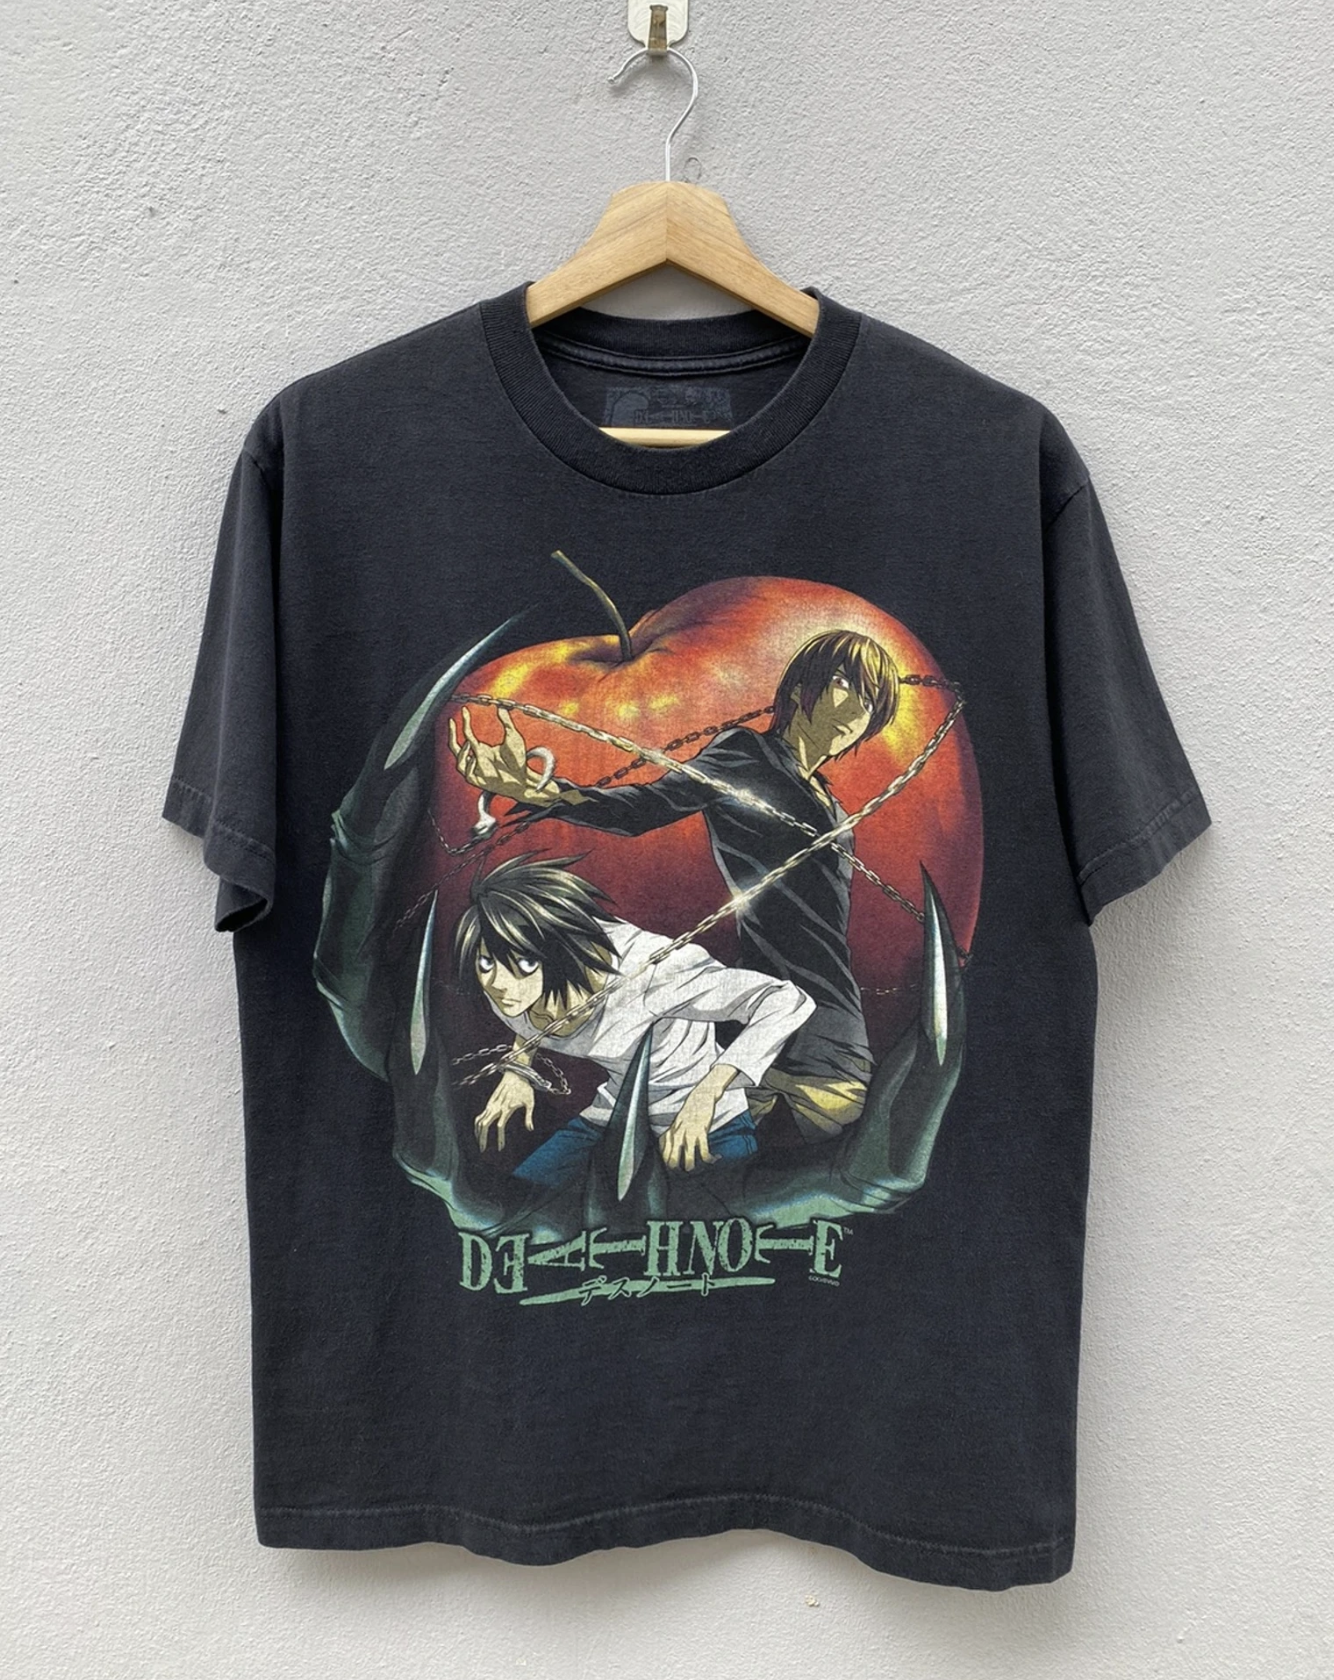 4 online marketplaces to buy vintage anime shirts.